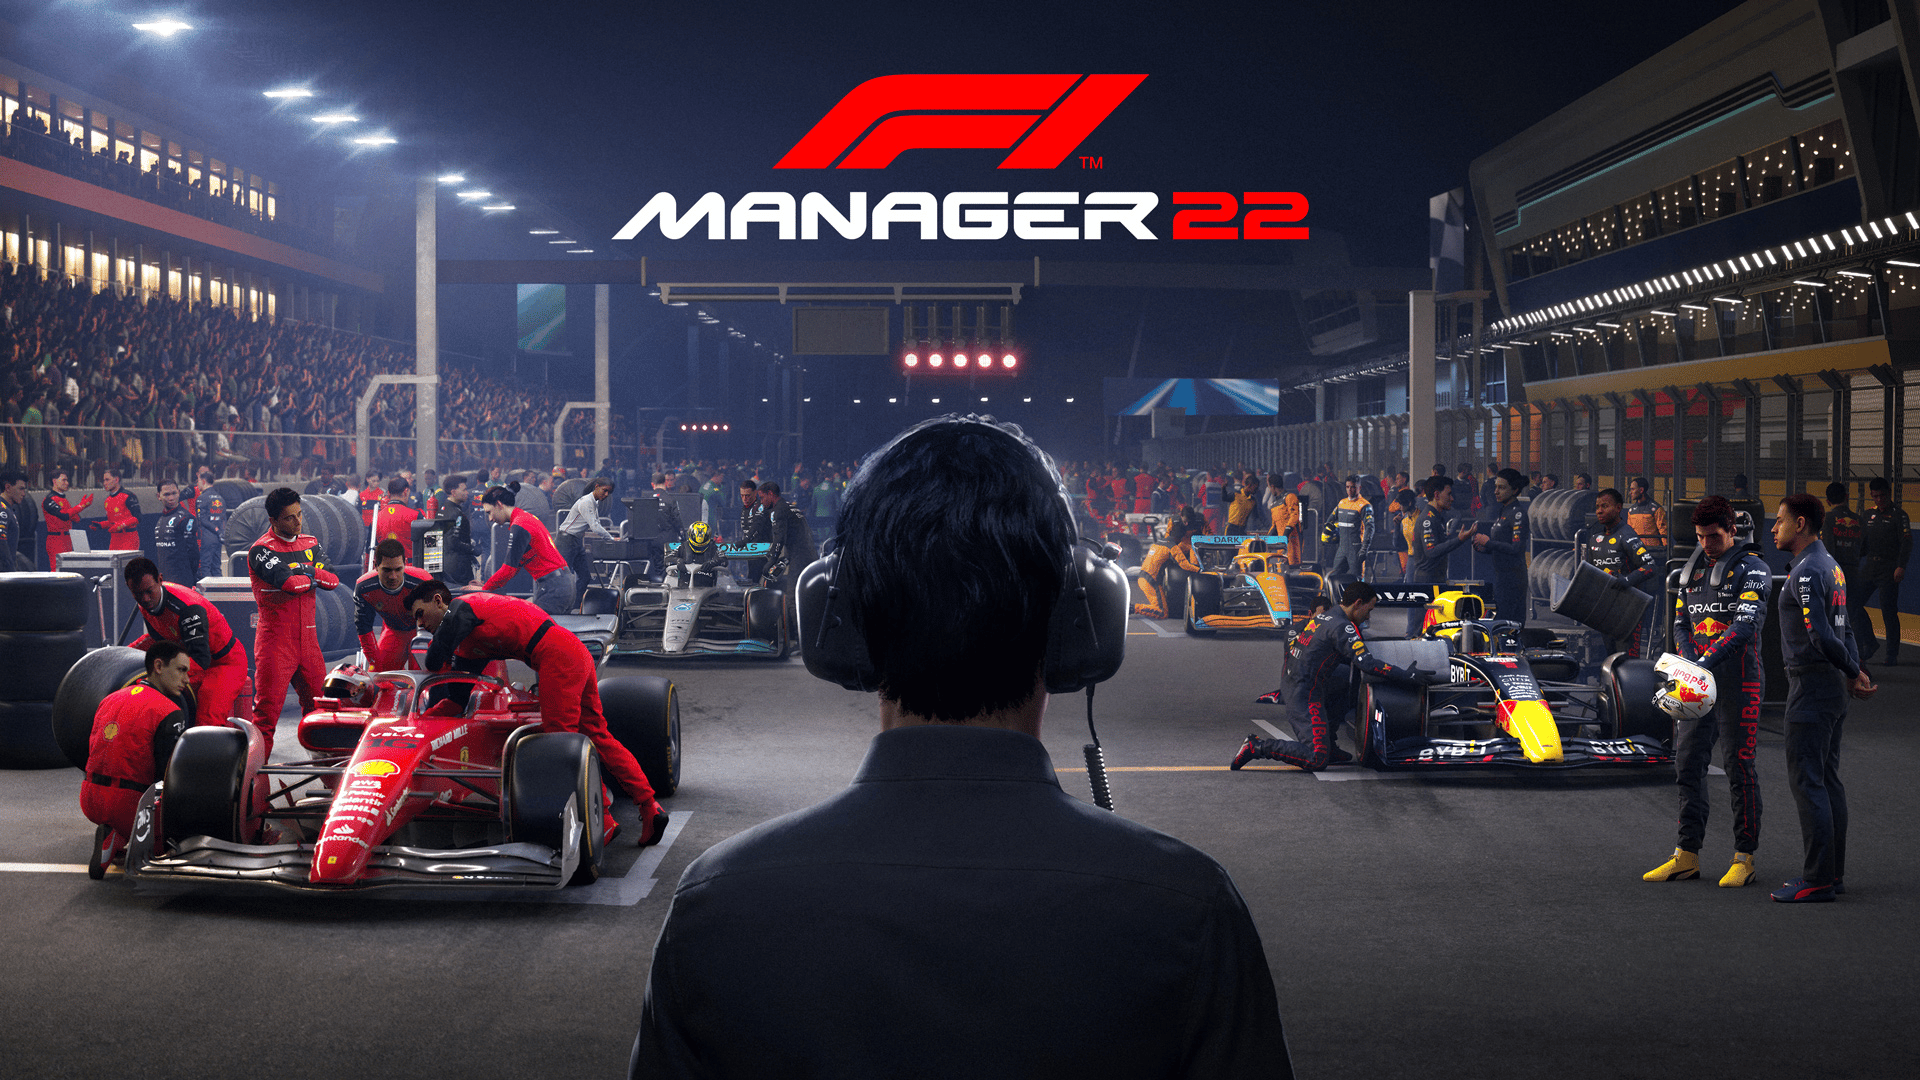 F1 manager 2022 post launch support